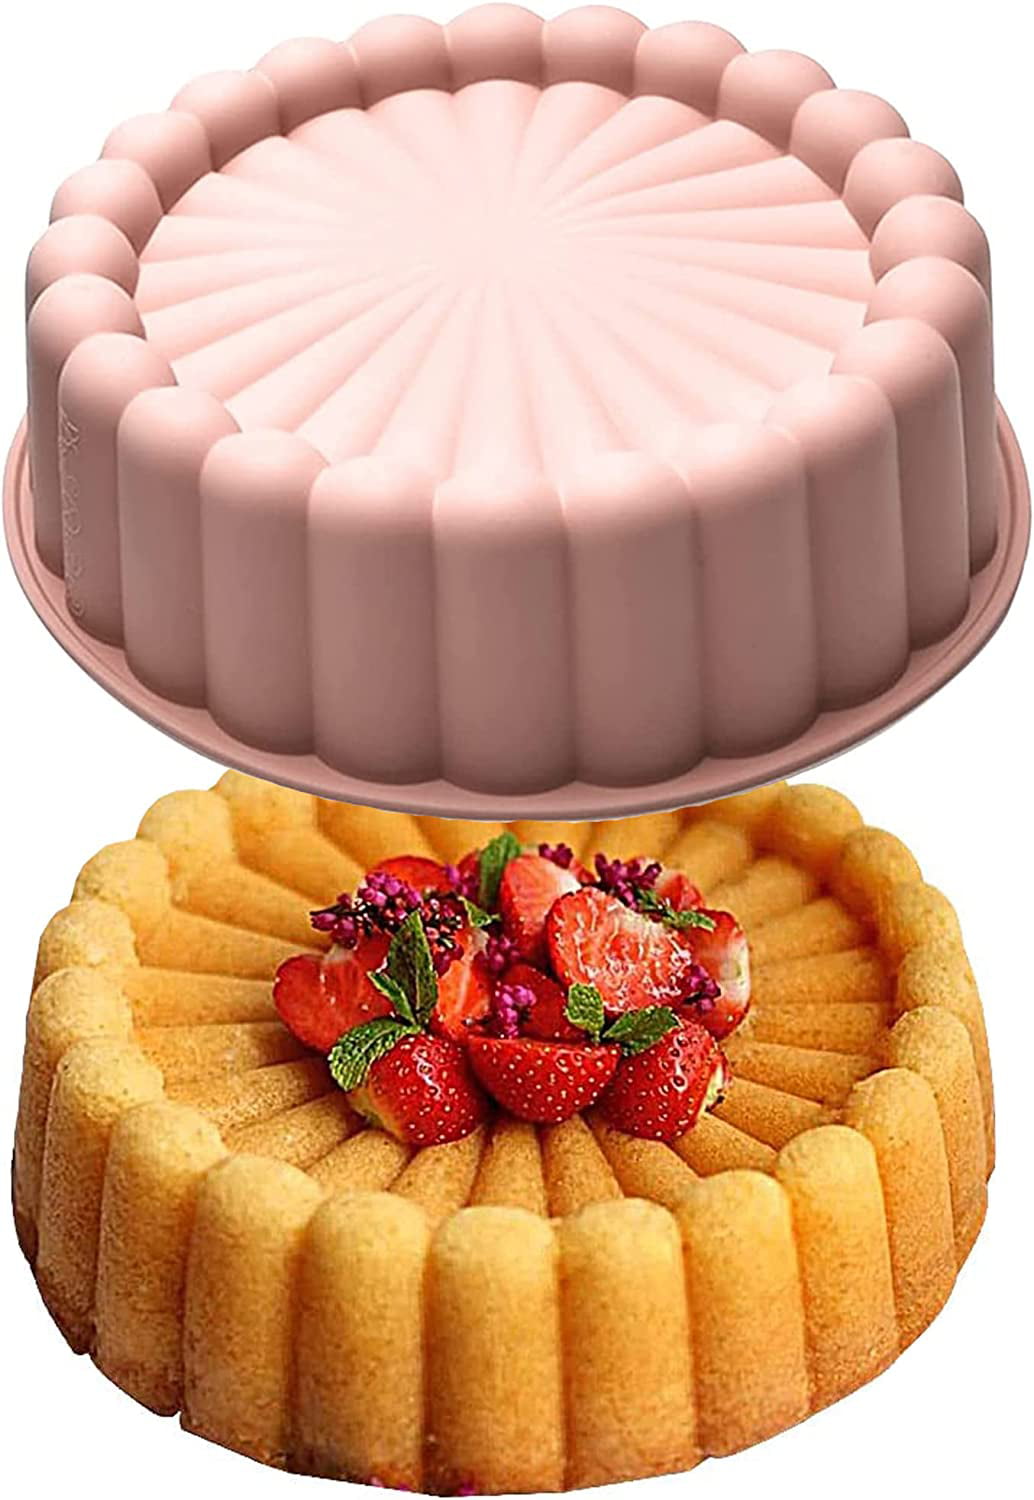 Charlotte Cake Pan Covers Several Sizes and Patterns -  Denmark